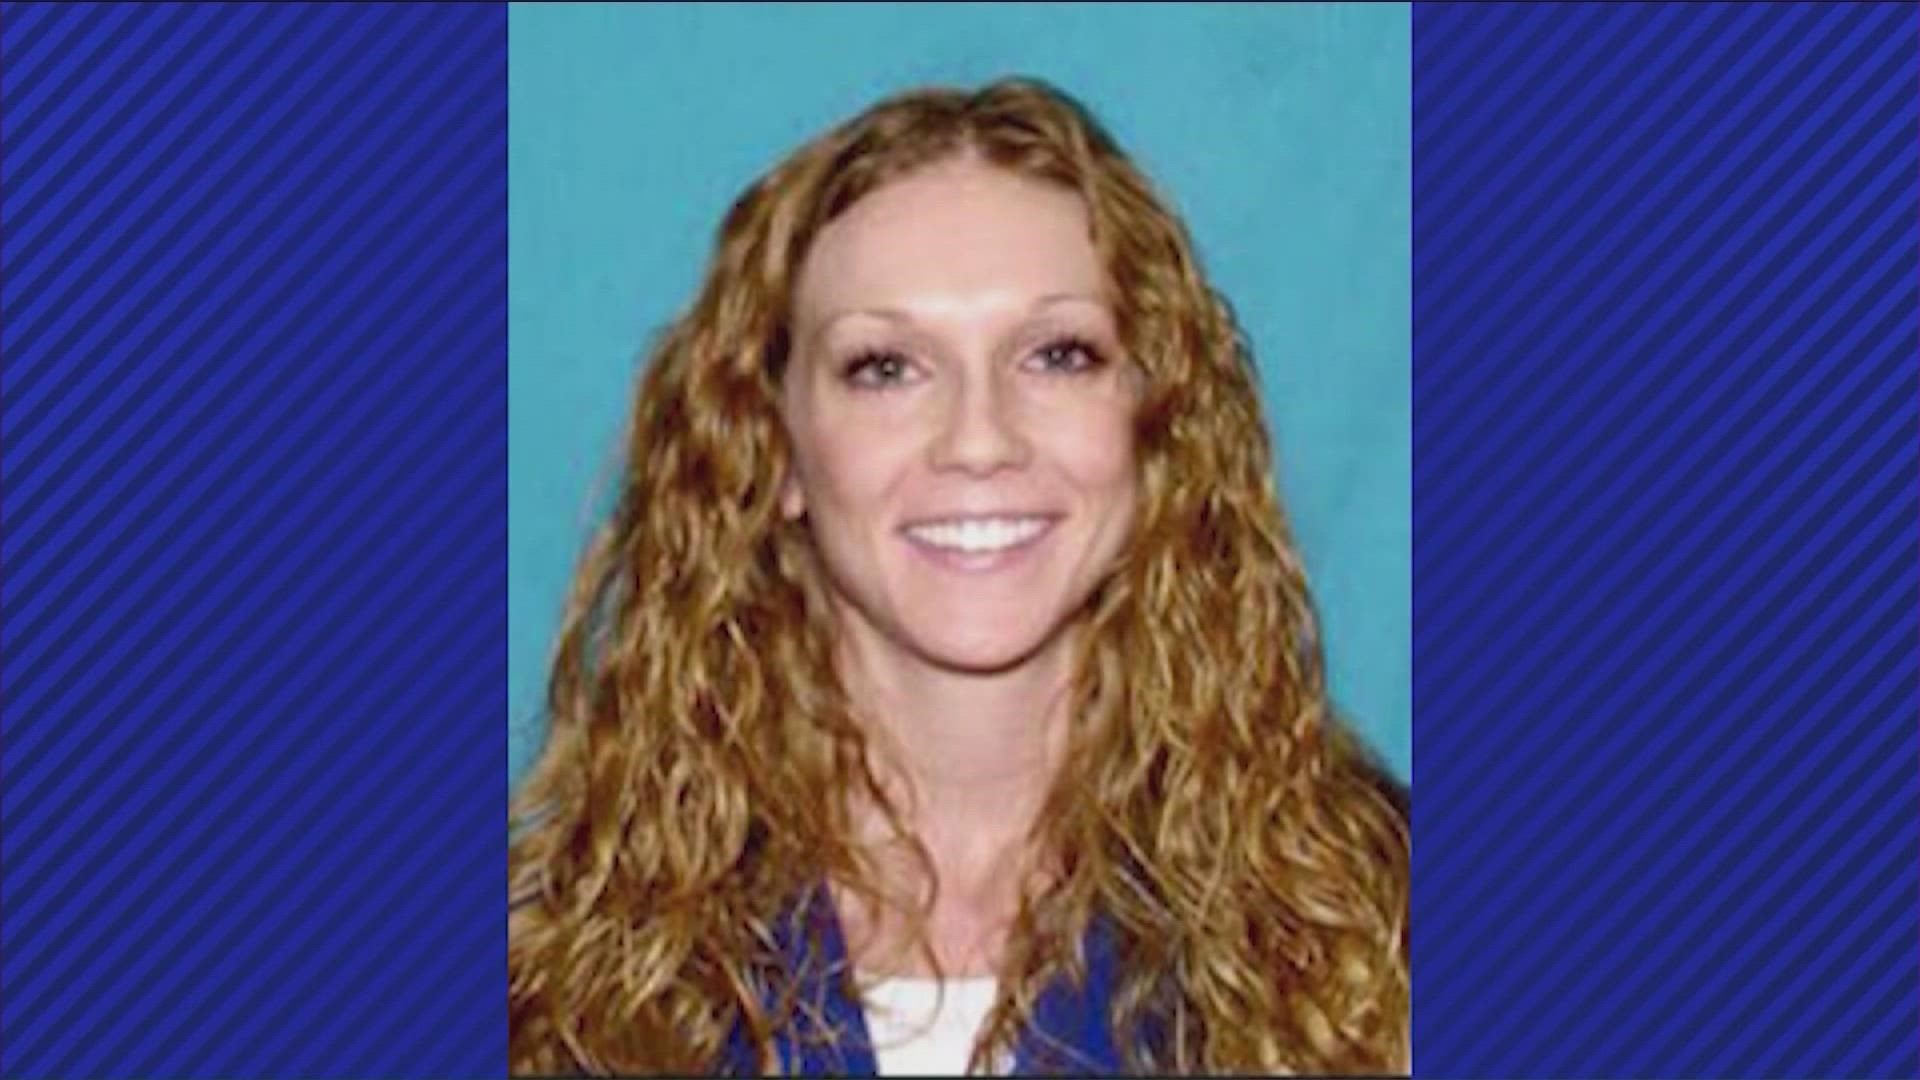 Kaitlin Armstrong is wanted in connection with the murder of Moriah Wilson. Authorities have been searching for her for more than a month.